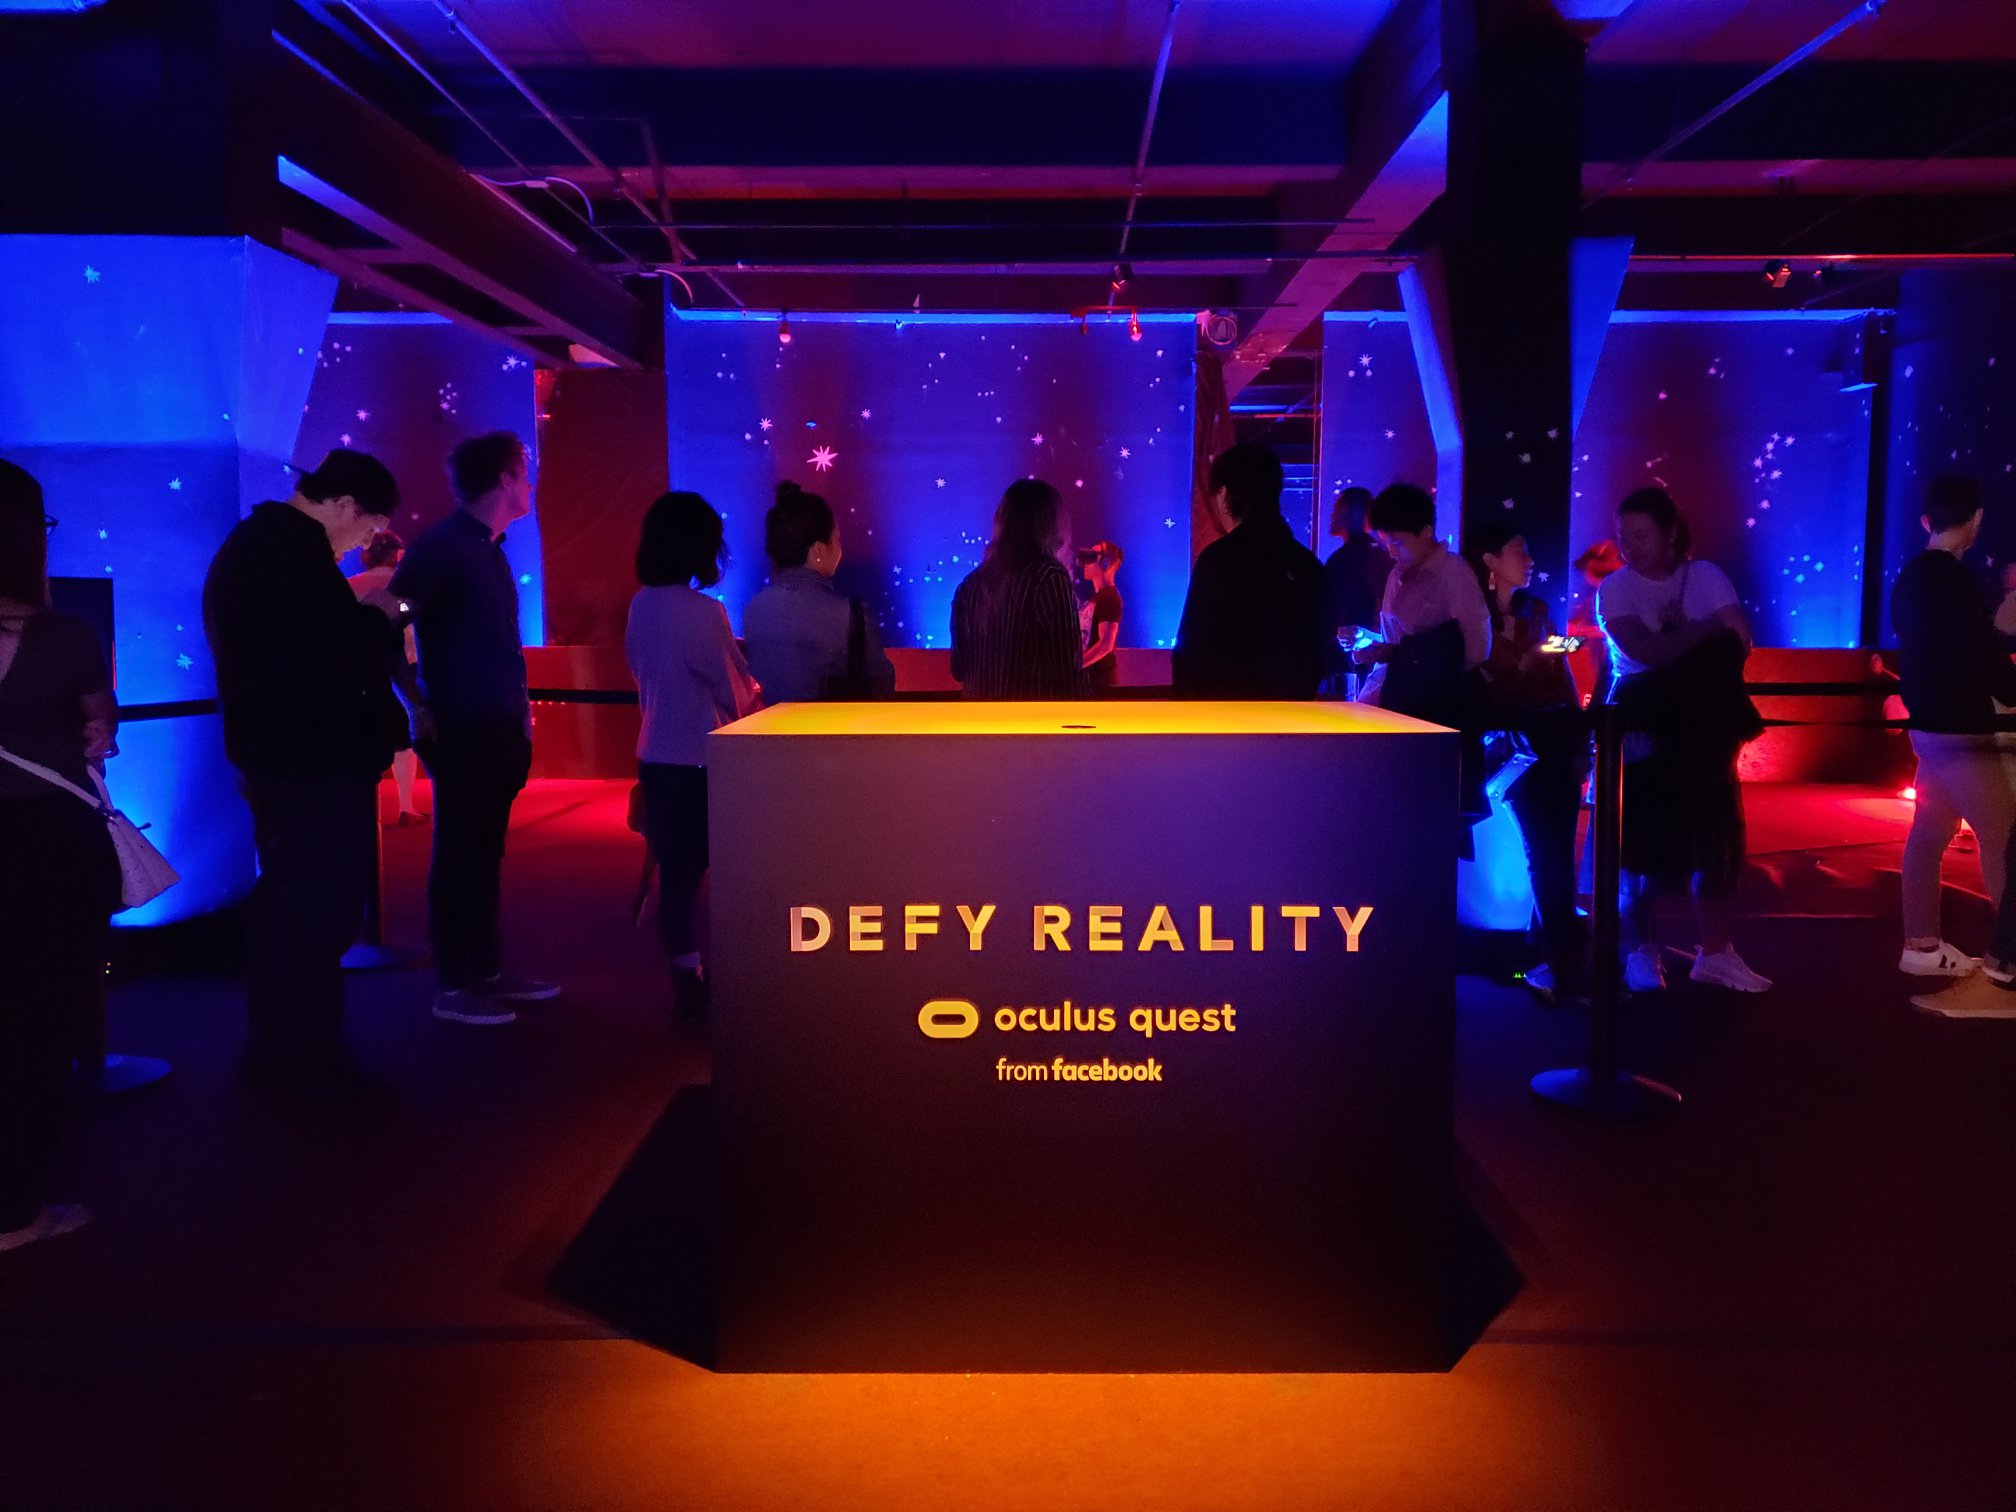 Oculus Quest, Defy Reality